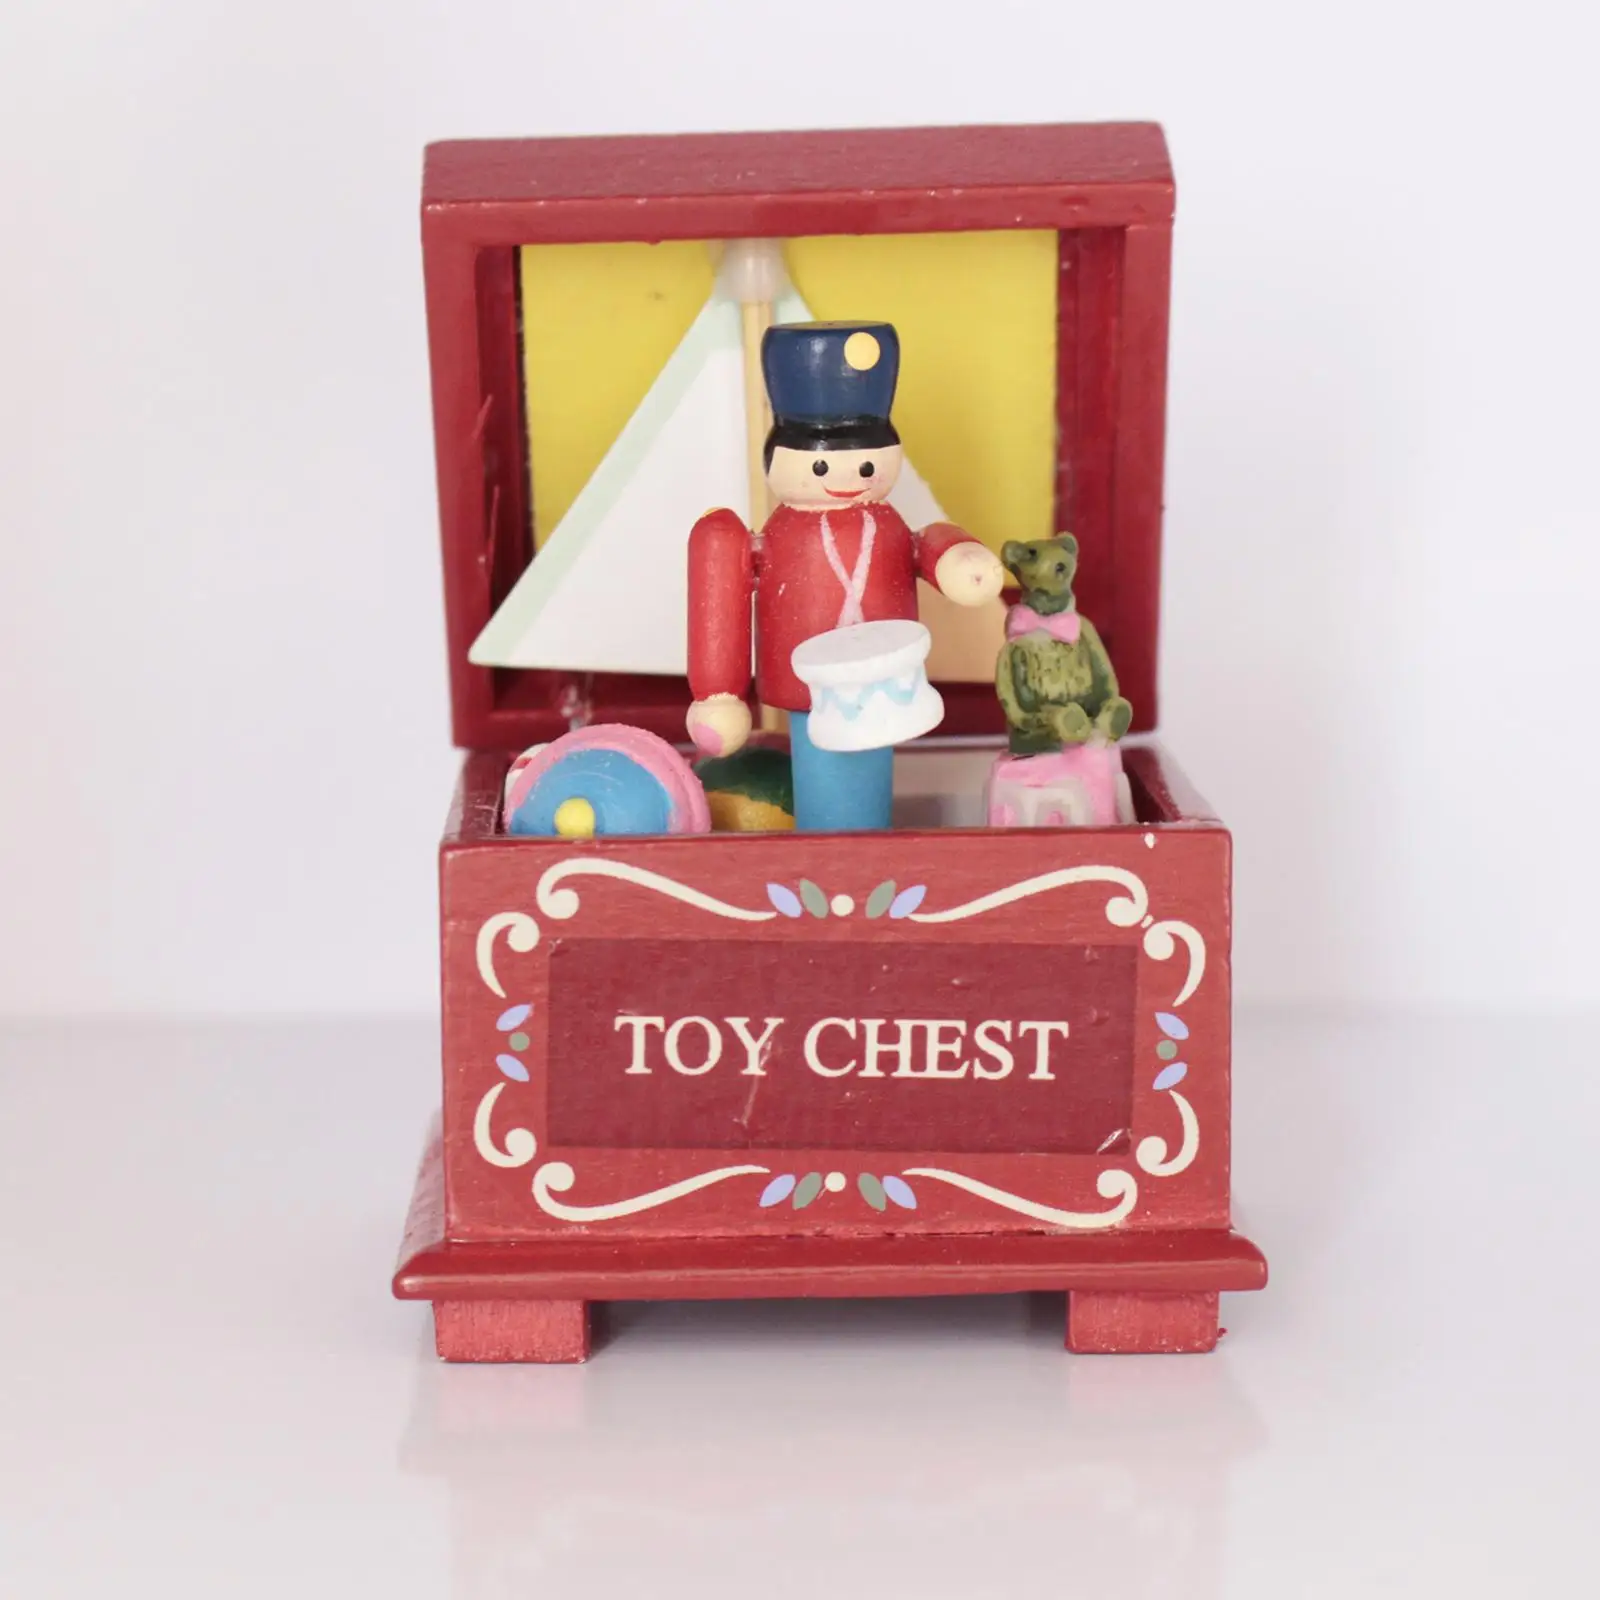 Dollhouse Toys Chest Full of Toys Decoration Ornaments Craft Project for Dollhouse Fairy Garden Playhouse DIY Projects Bedroom